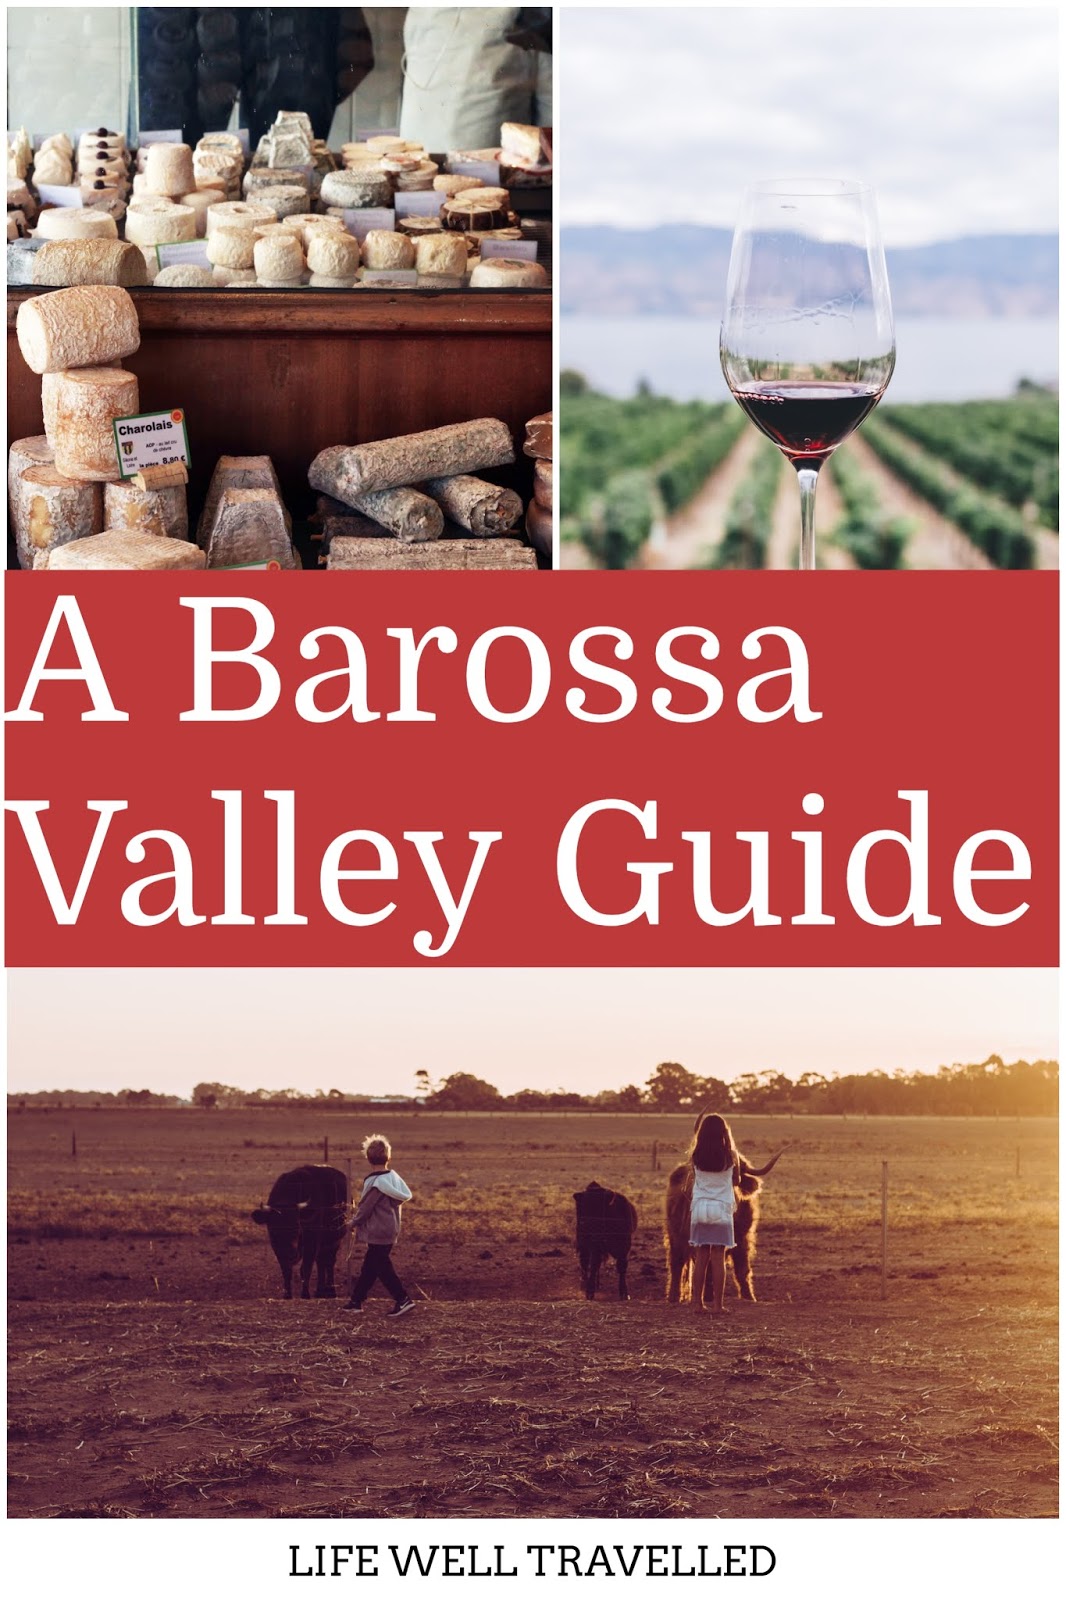 A Barossa Valley Guide